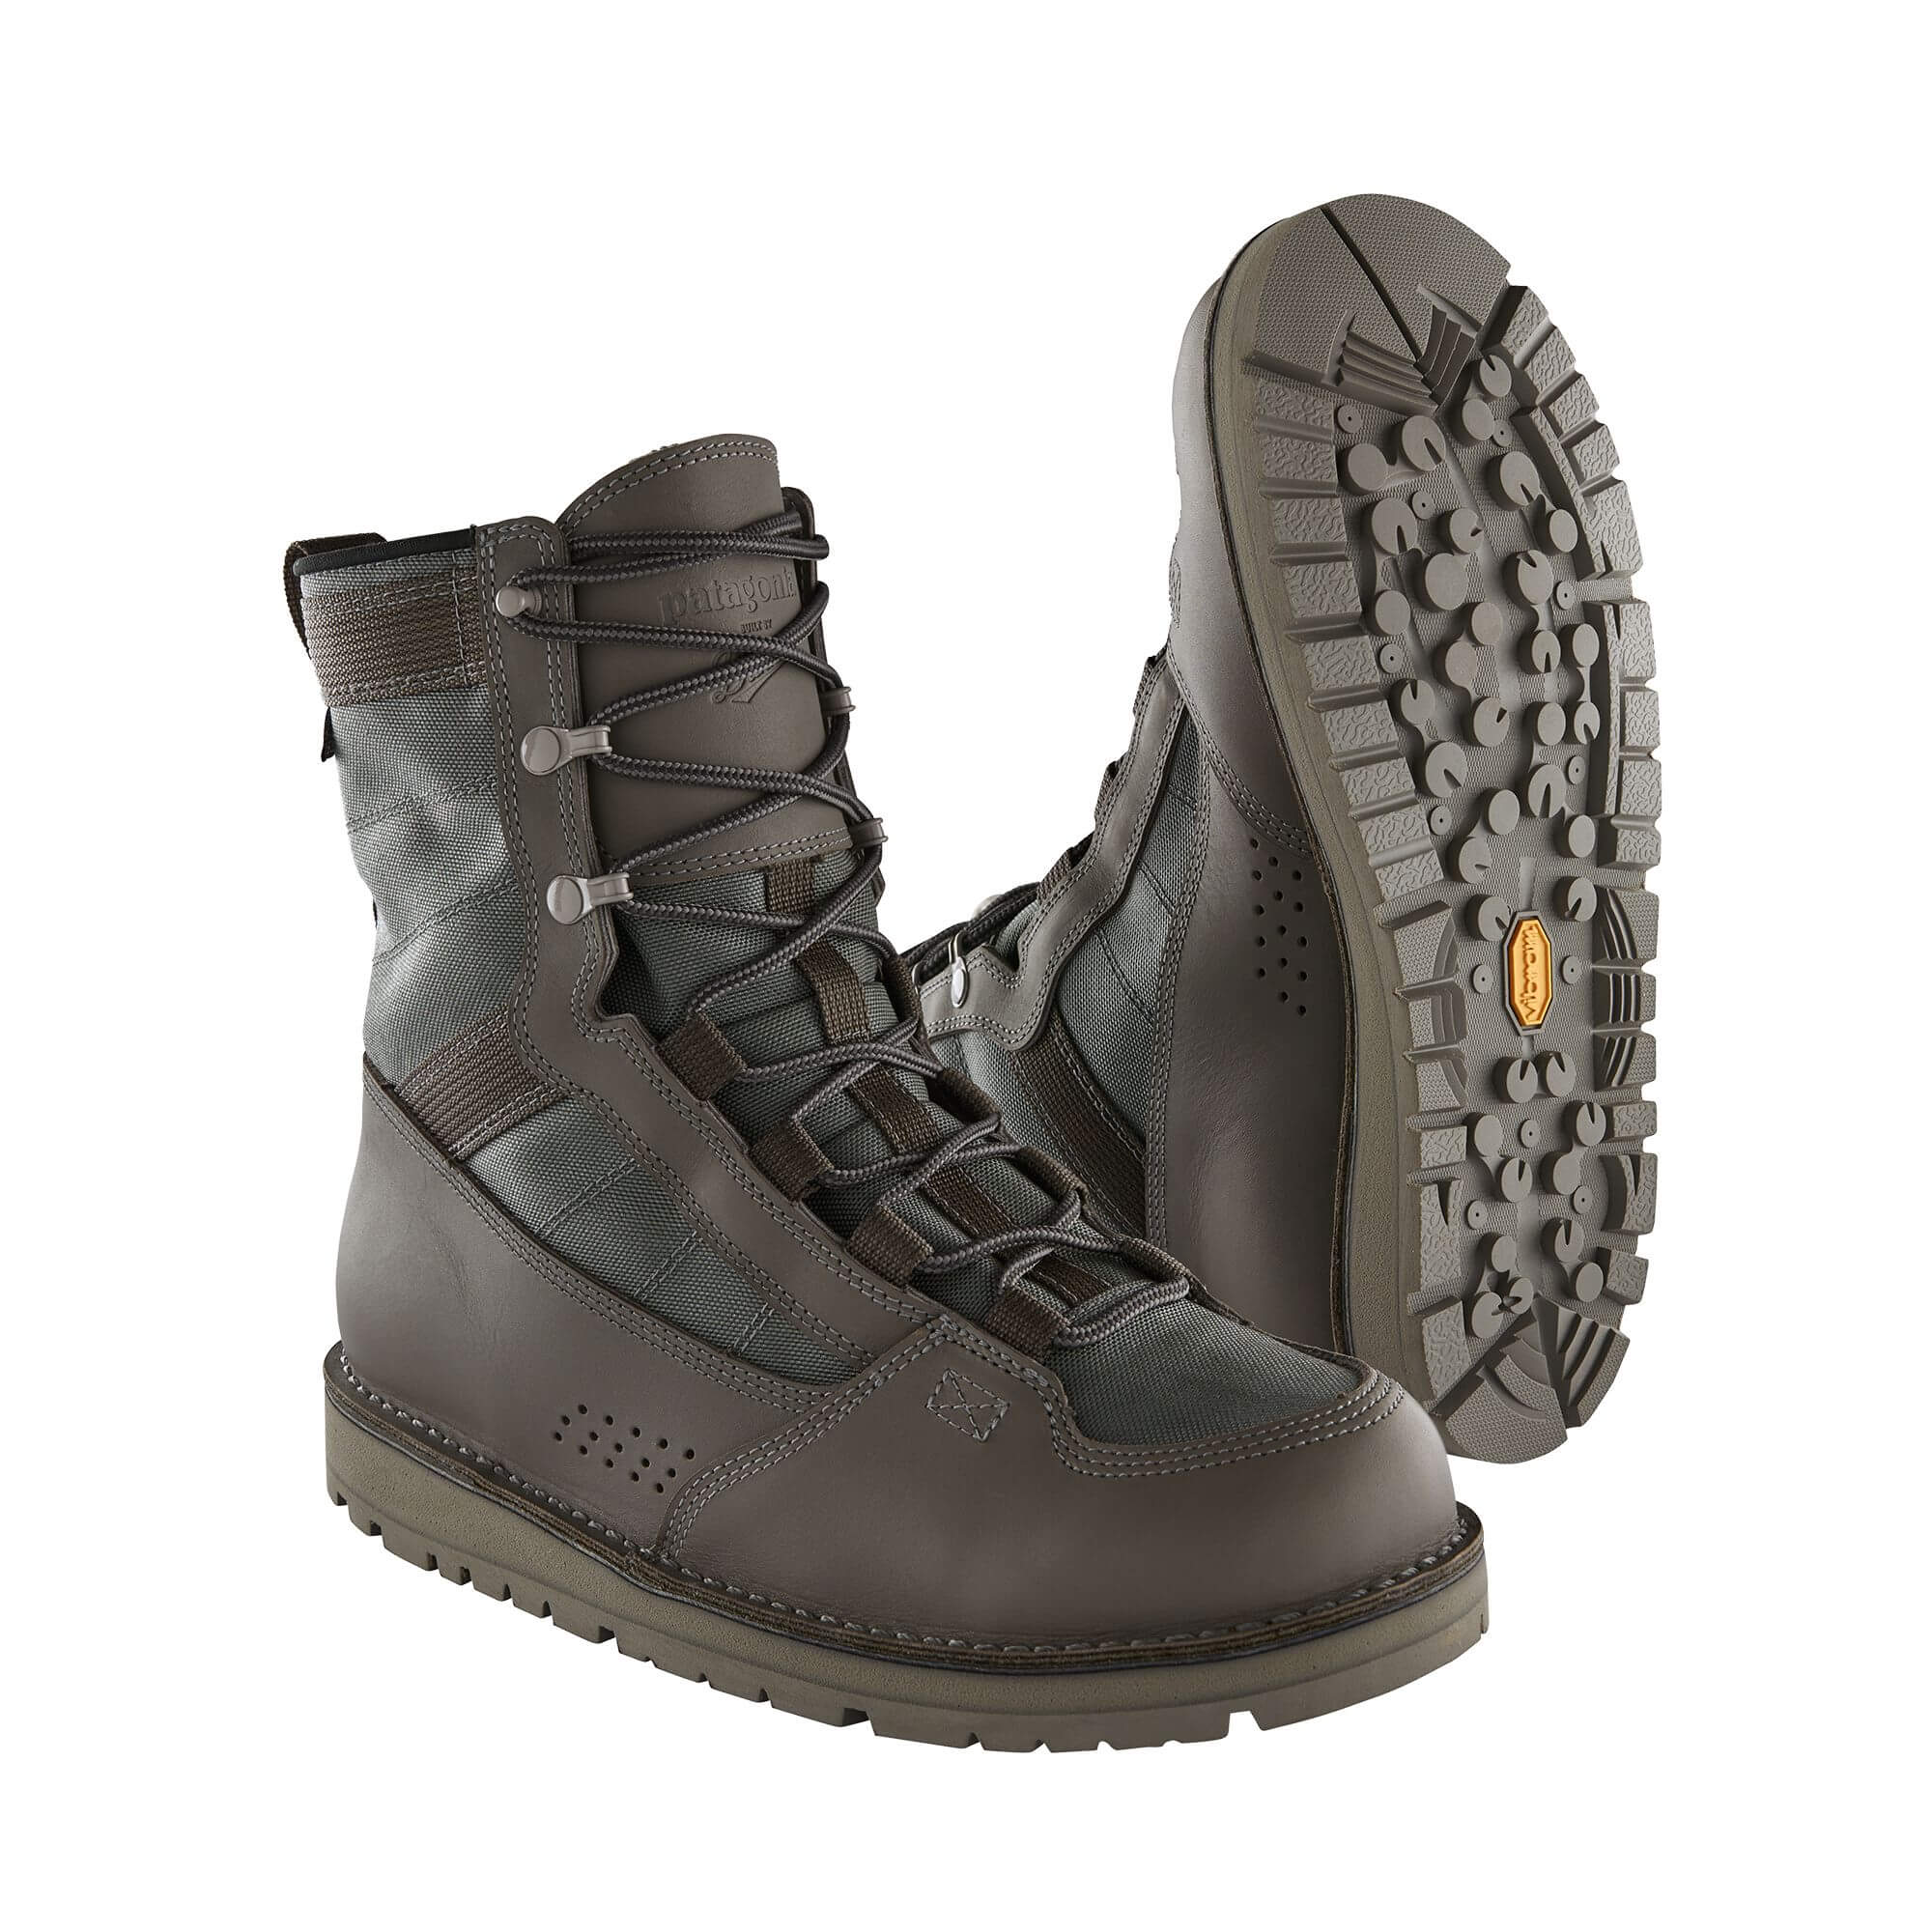 Patagonia River Salt Wading Boot (by Danner) - 9